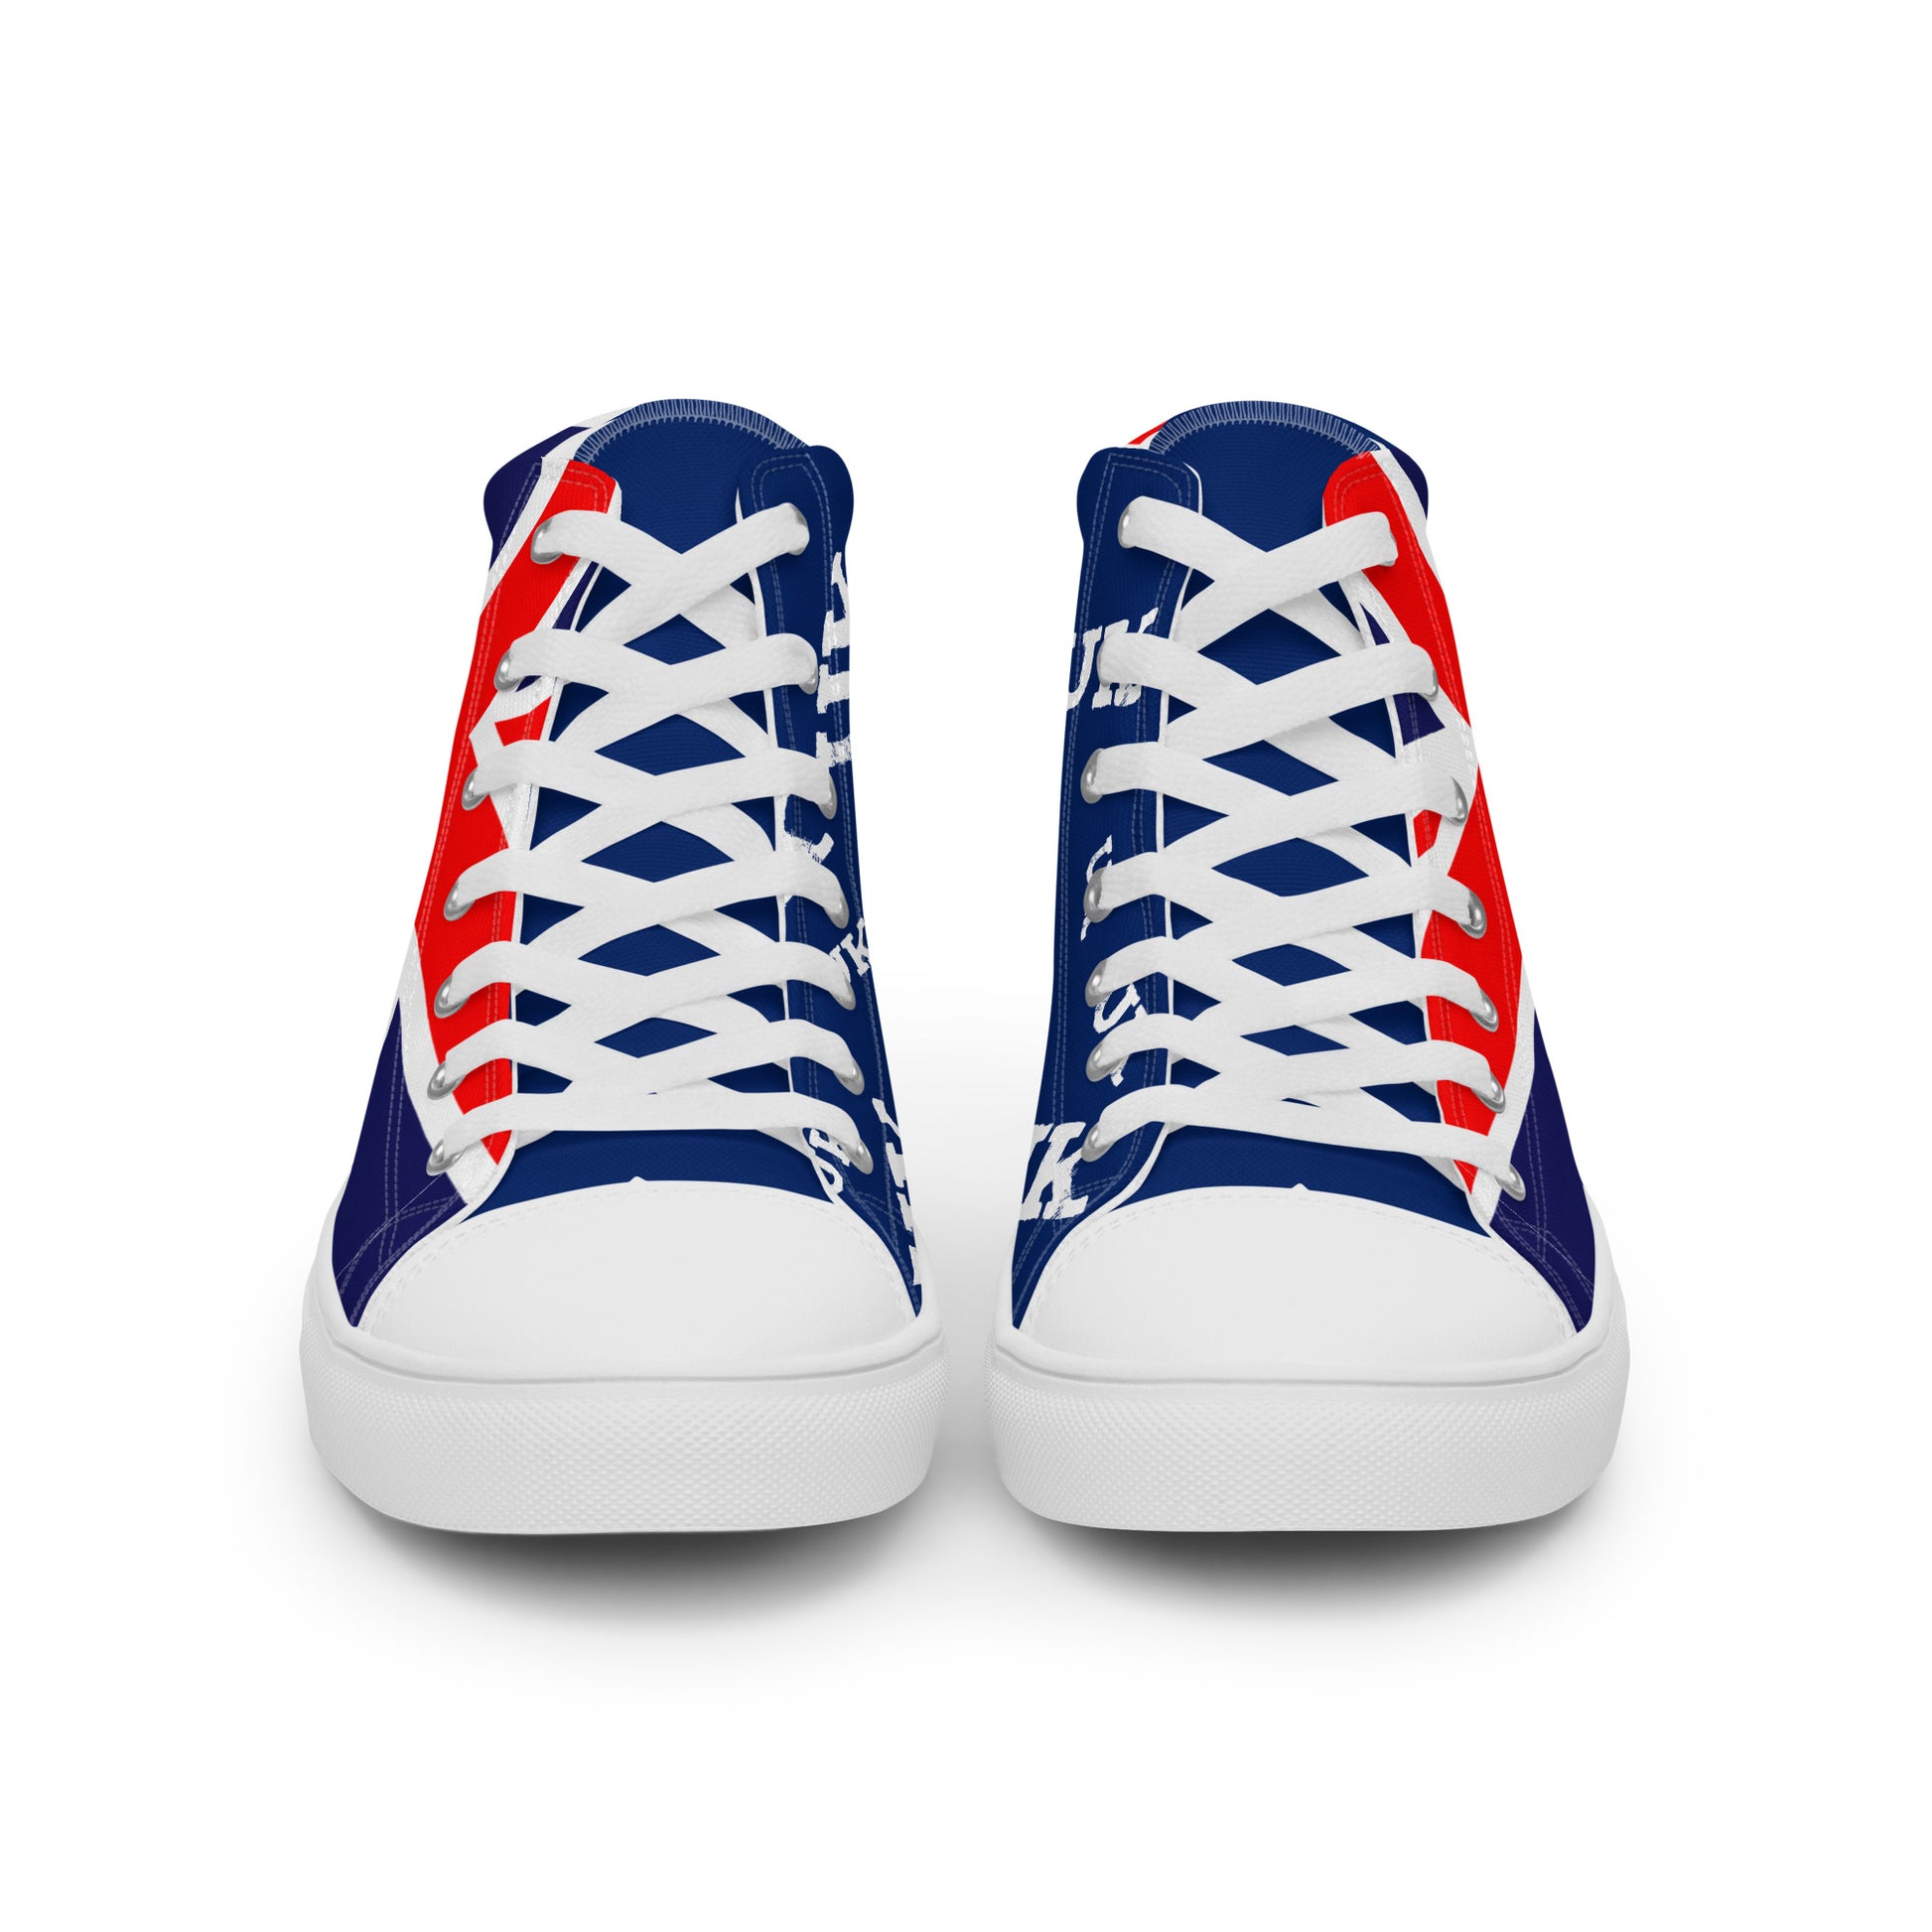 High Top Sneakers For Women With UK Print – YVDdesign